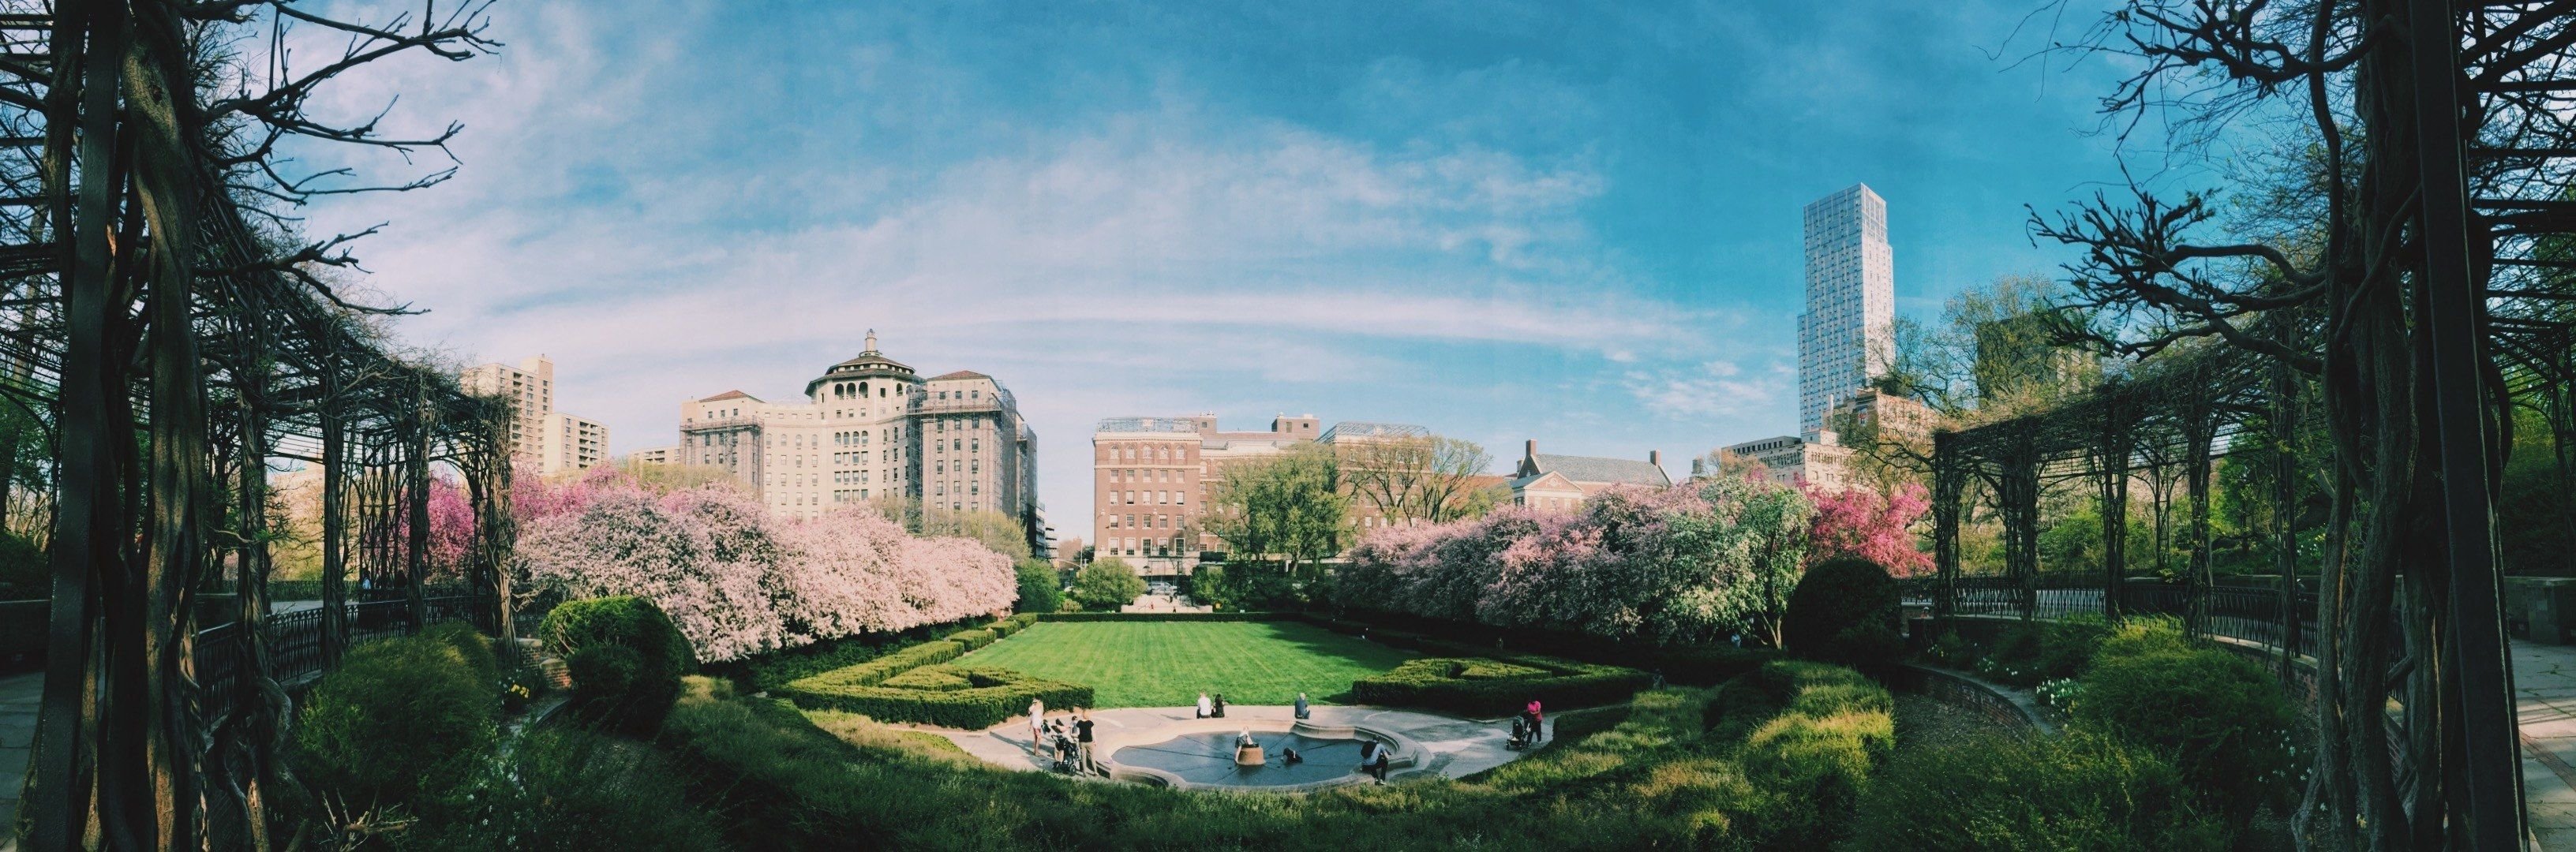 panorama of the conservatory garden with pink bushes in central